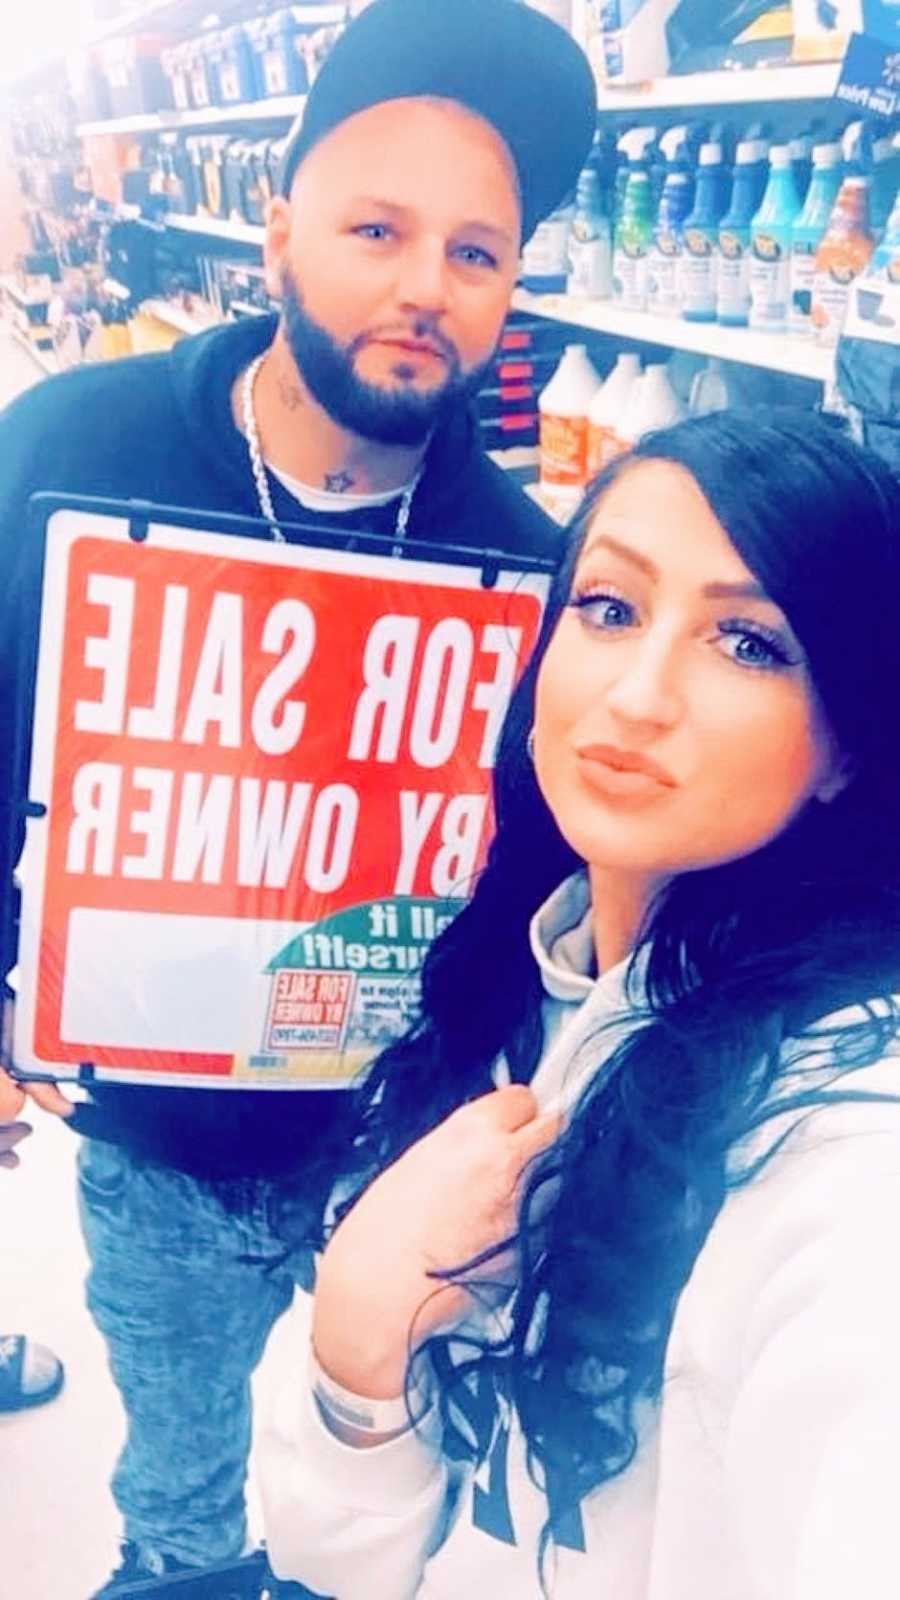 Couple moving in together take a selfie with a "for sale by owner" sign